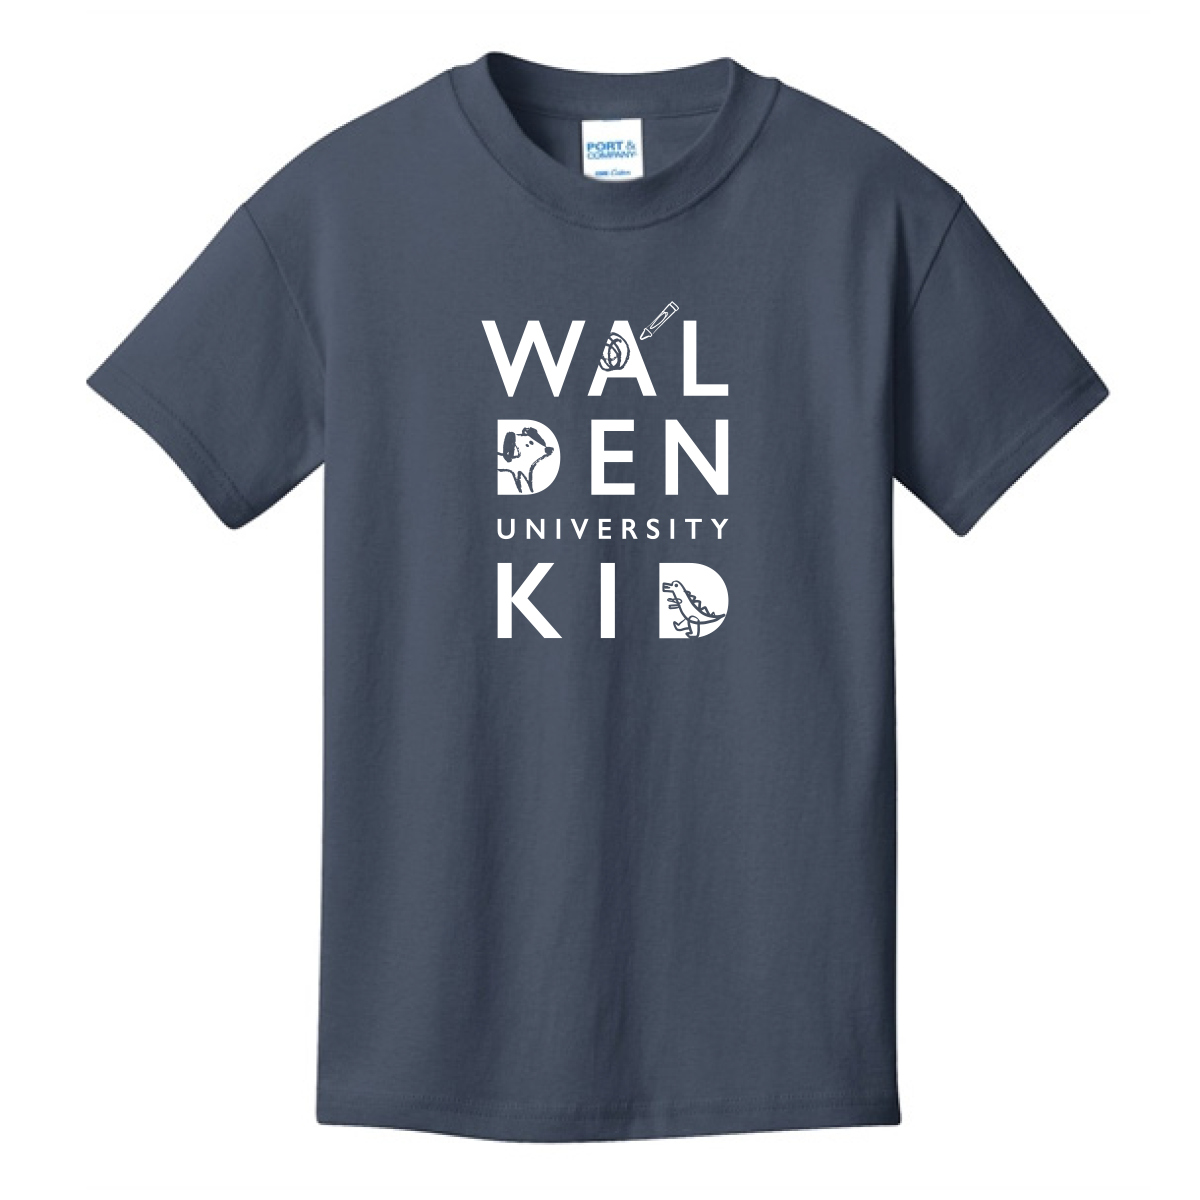 WALDEN KID — ILLUSTRATED — YOUTH T-SHIRT